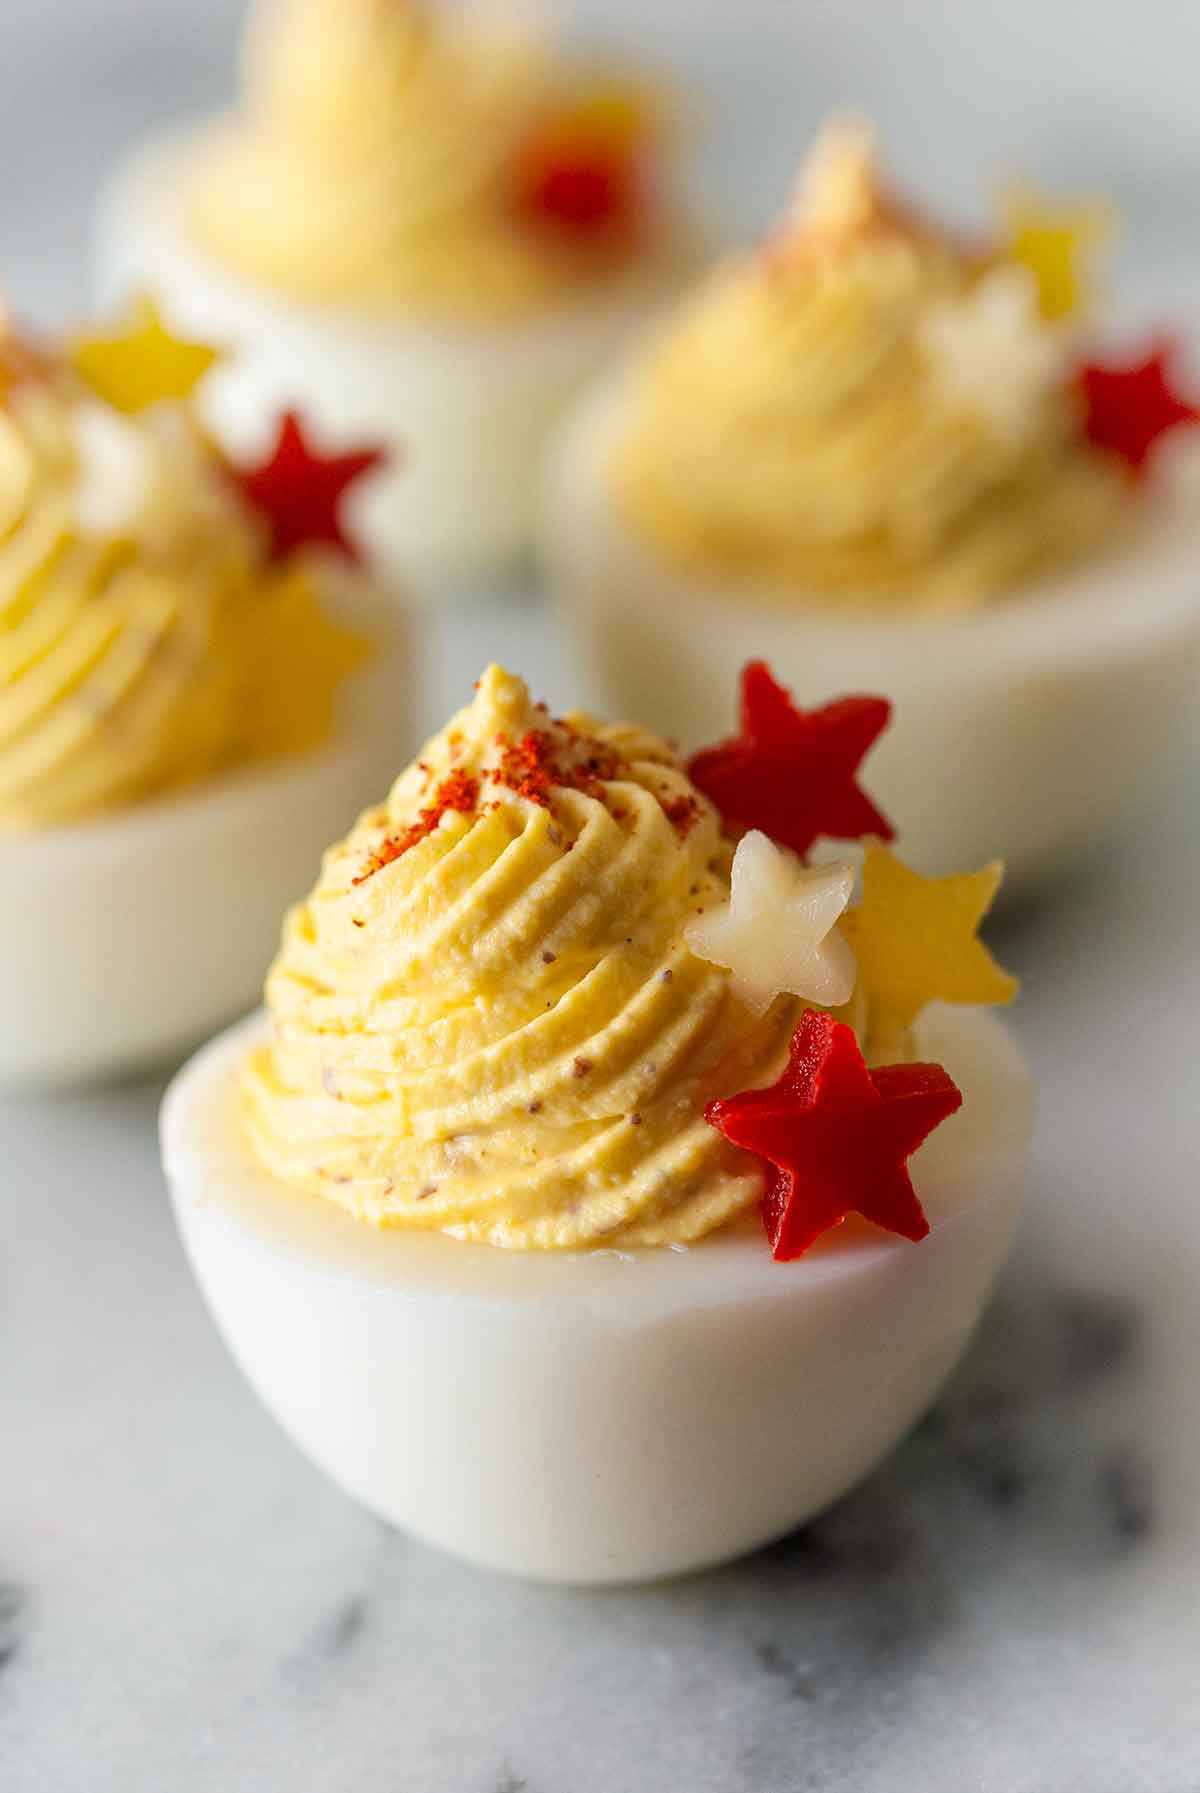 4 deviled eggs on marble, garnished with 4 stars made of red and yellow peppers and cheese.